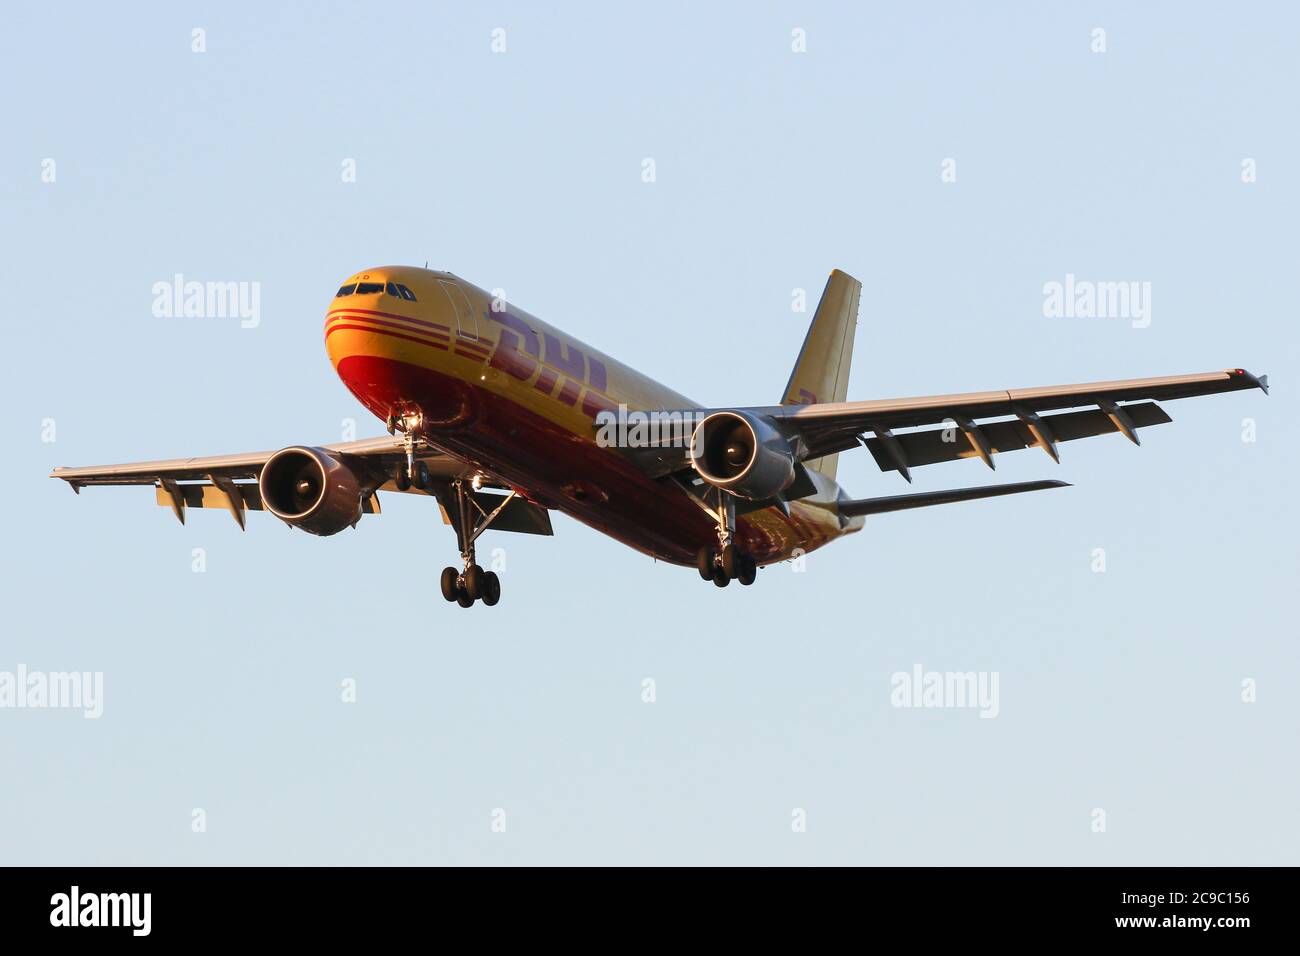 An Airbus A300B4-622R(F) flying for DHL European Air Transport lands at London Heathrow Airport Stock Photo